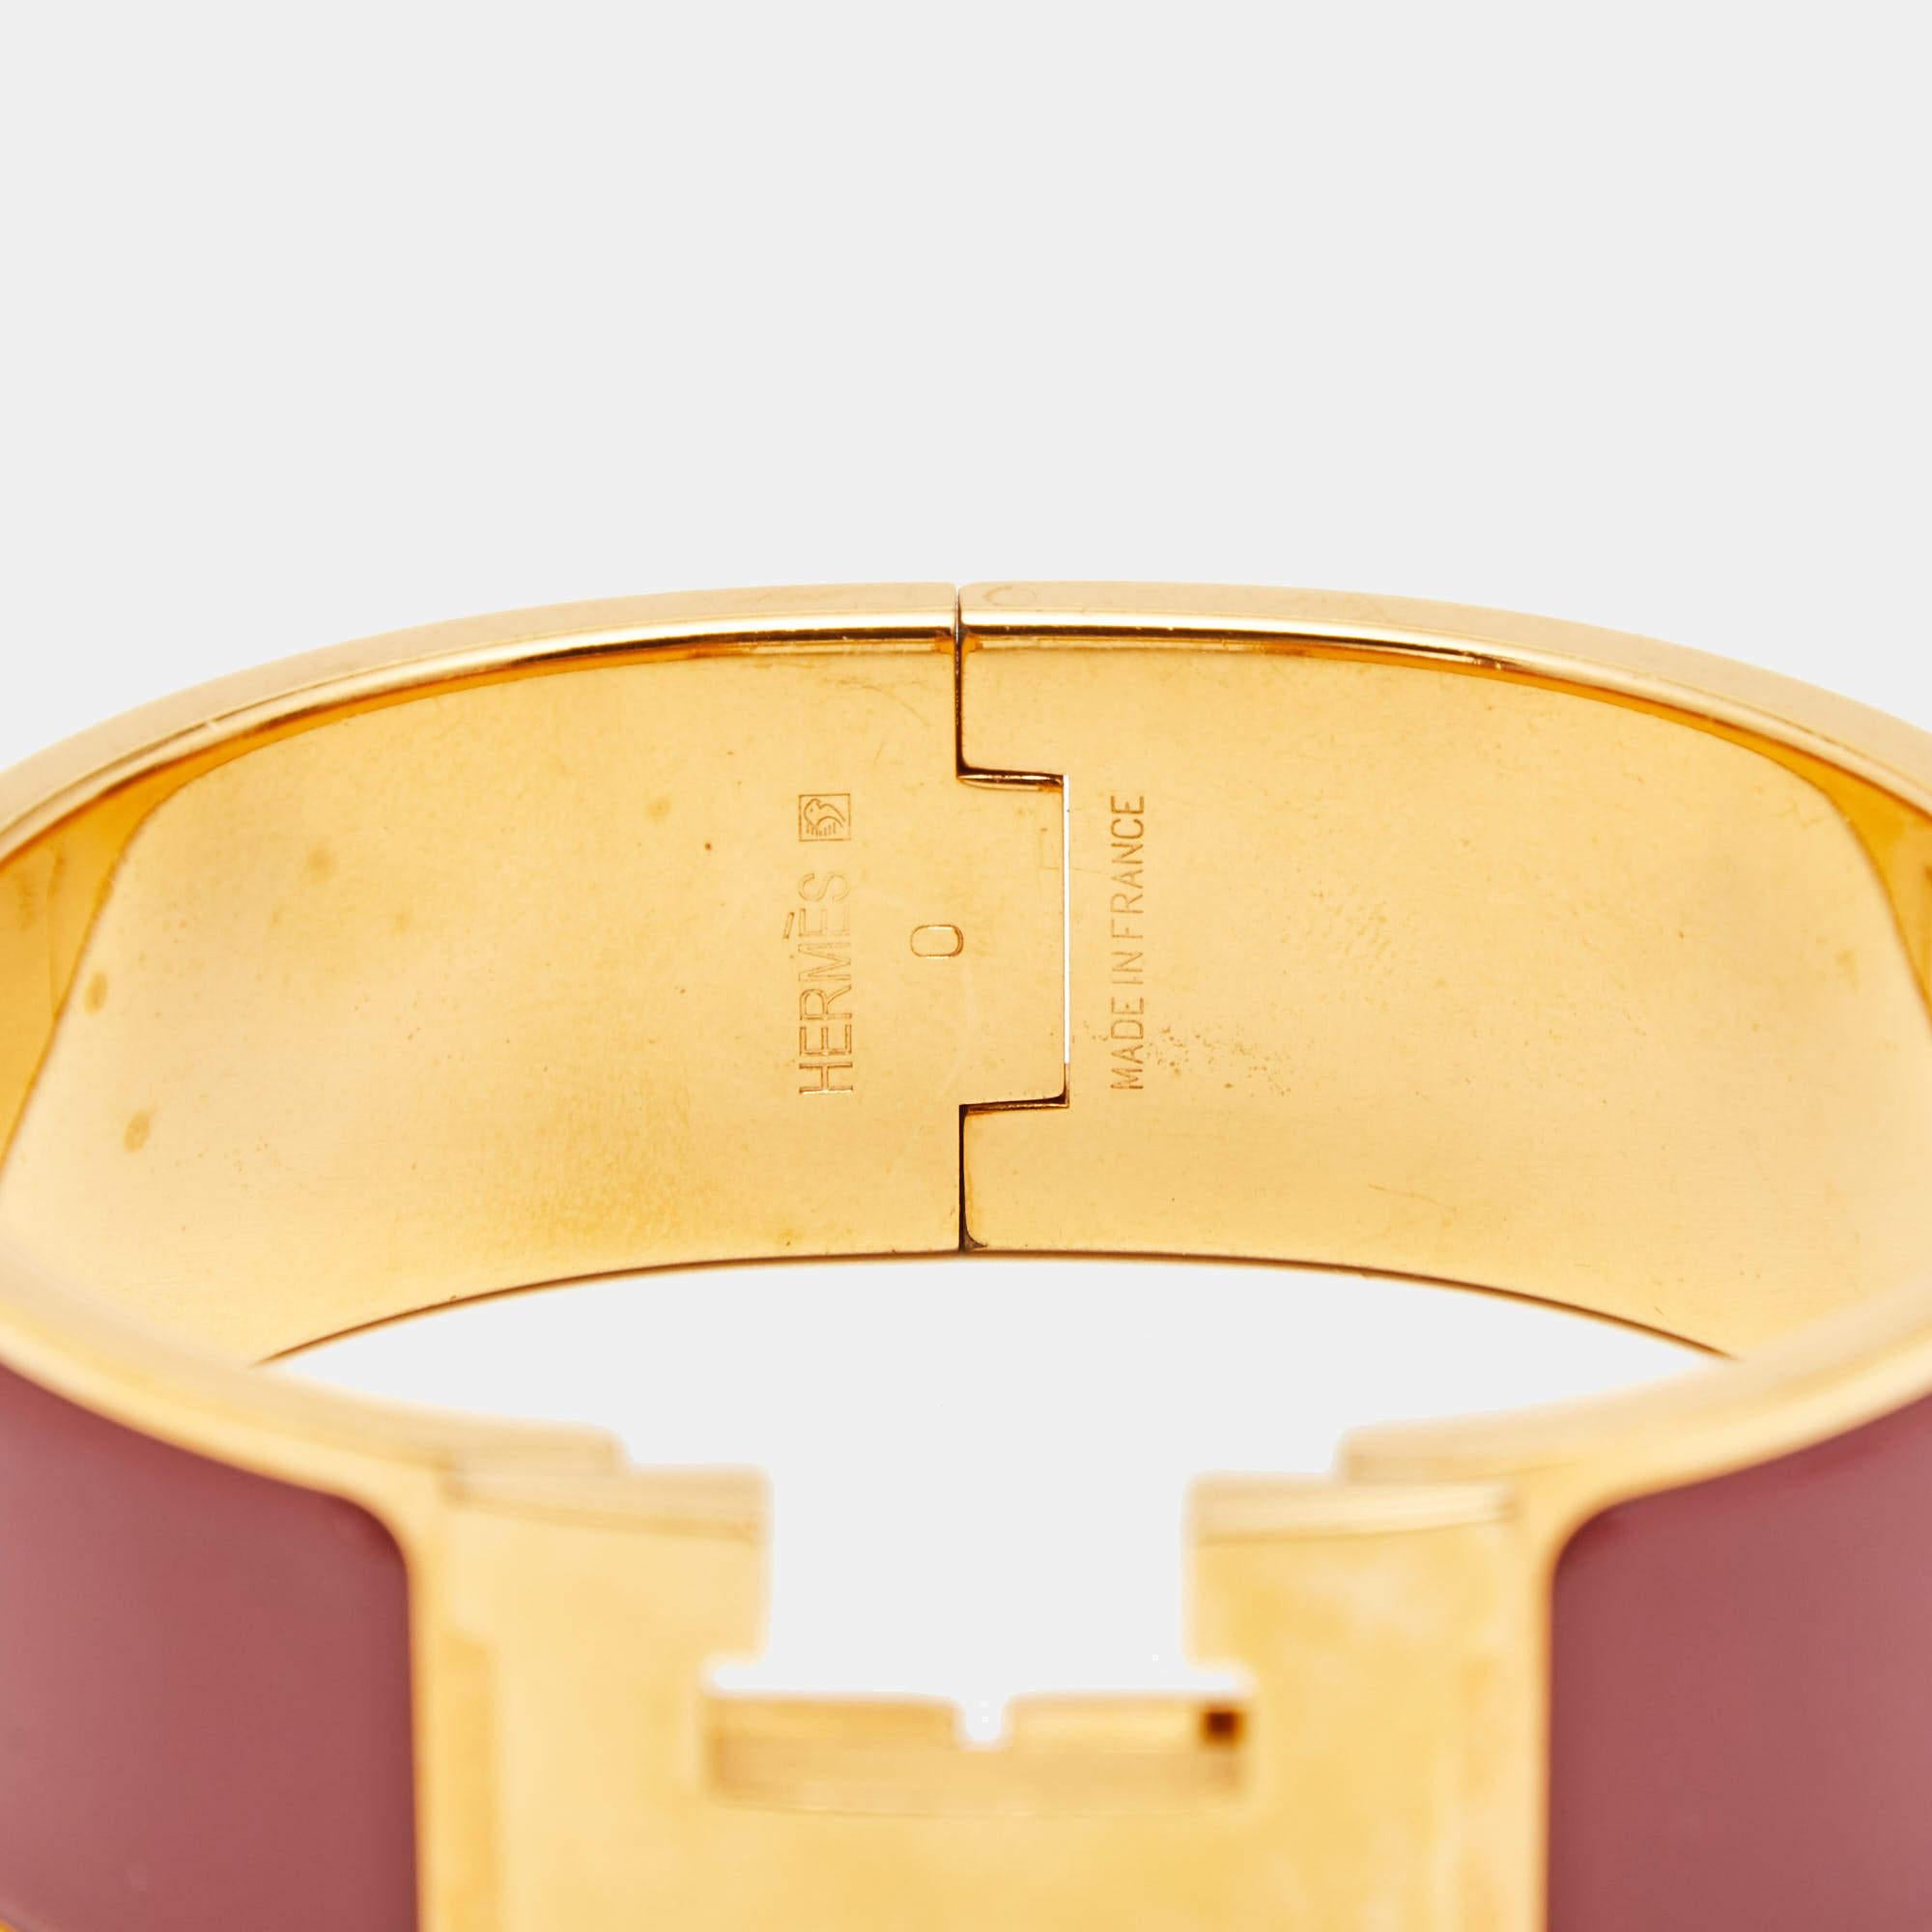 Adorn your wrist with this stunner of a bracelet from Hermès. The piece is from their Clic Clac H collection, and it has been crafted from gold-plated metal and designed with enamel. This bracelet is complete with the iconic H. Get those compliments